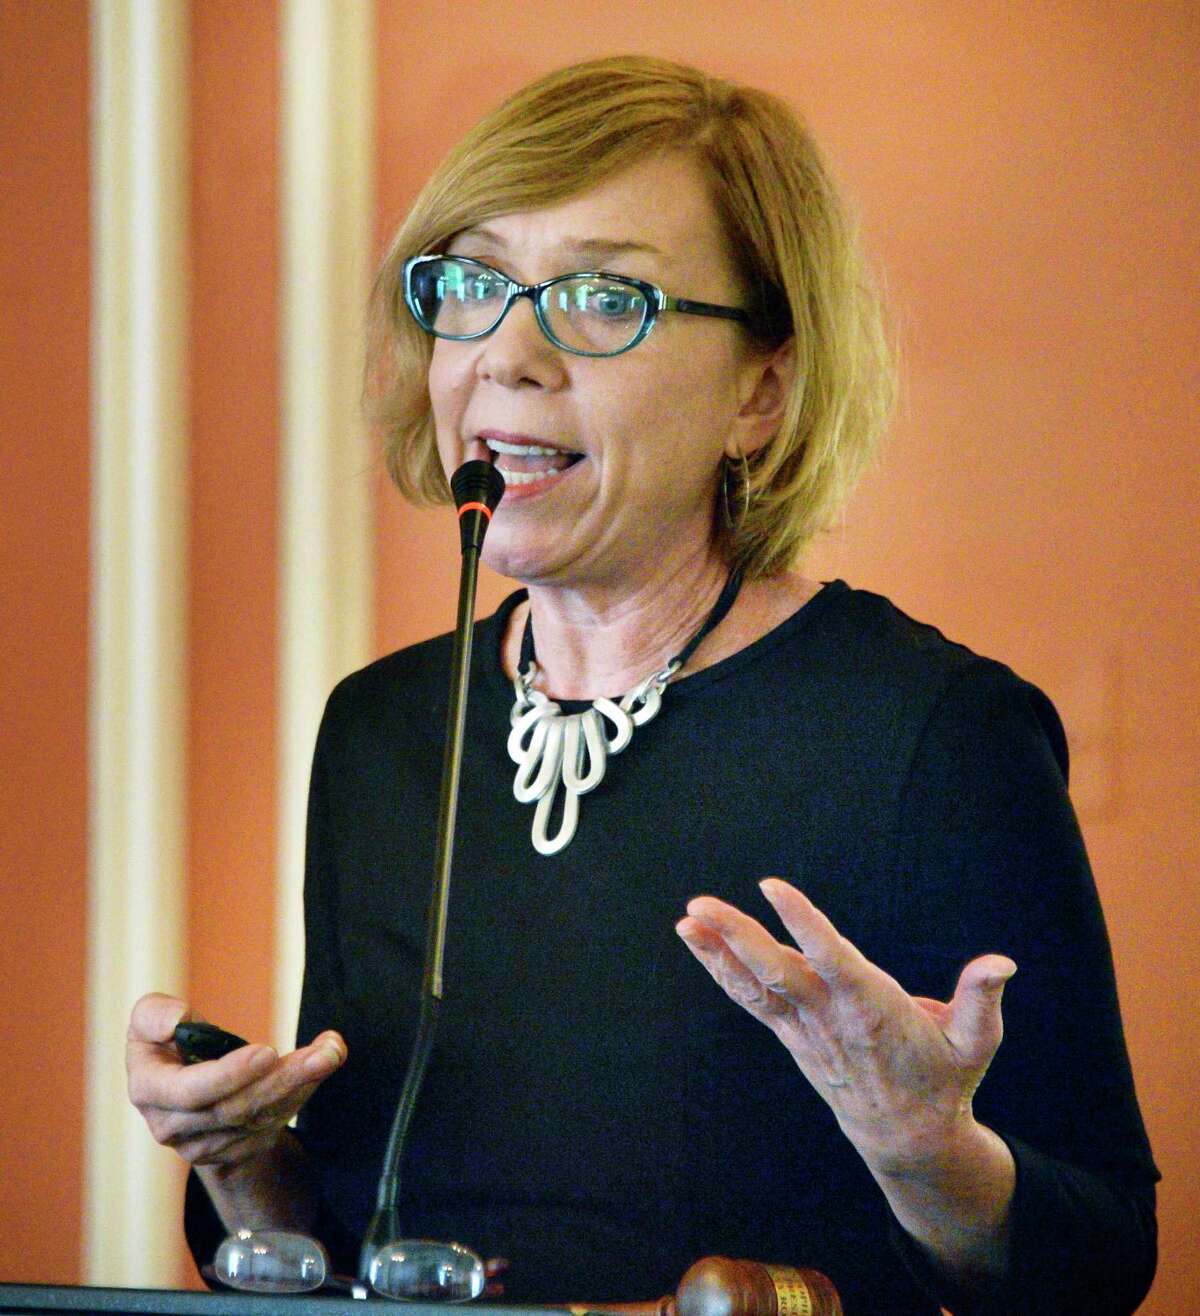 Maureen Sager, executive director of the Upstate Alliance for the Creative Economy, speaks during a roundtable discussion on the creative economy in upstate at the University Club Wednesday Oct. 10, 2018 in Albany, NY. (John Carl D'Annibale/Times Union)